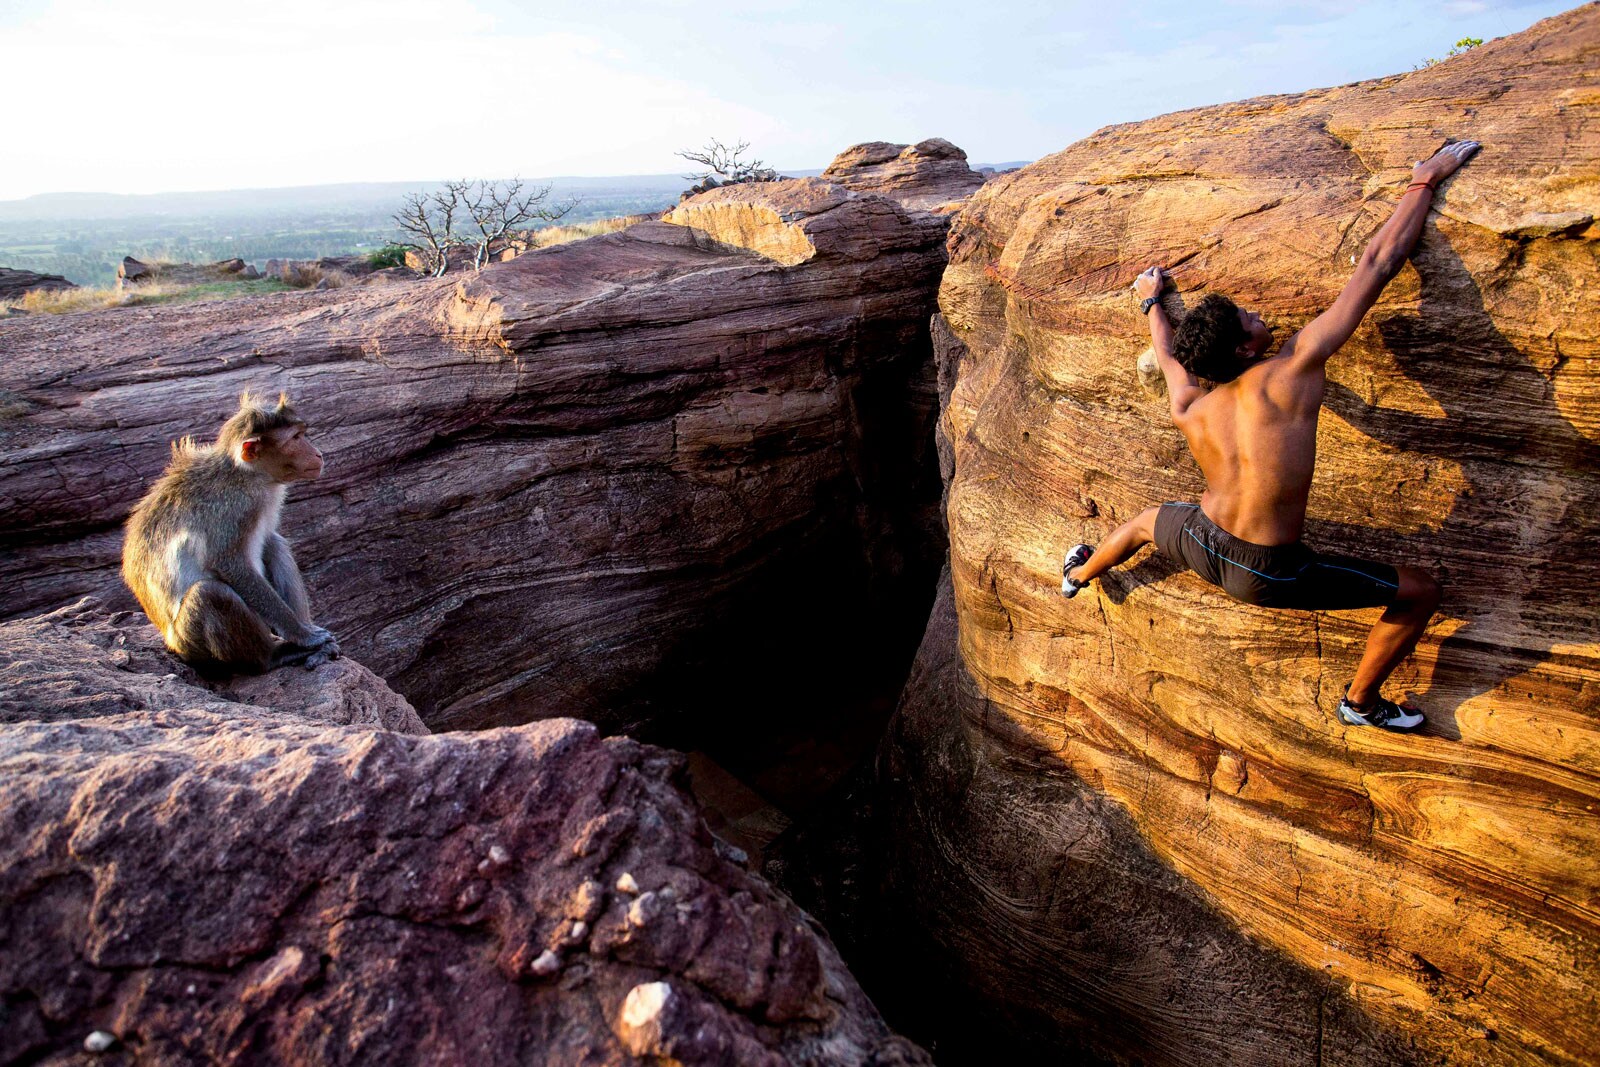 India's most decorated and accomplished climber, Praveen CM is seen bouldering in Badami, Karnataka. He holds the record of being the only man to successfully summit Mt Zambala, a treacherous mountain in Siachen Glacier.